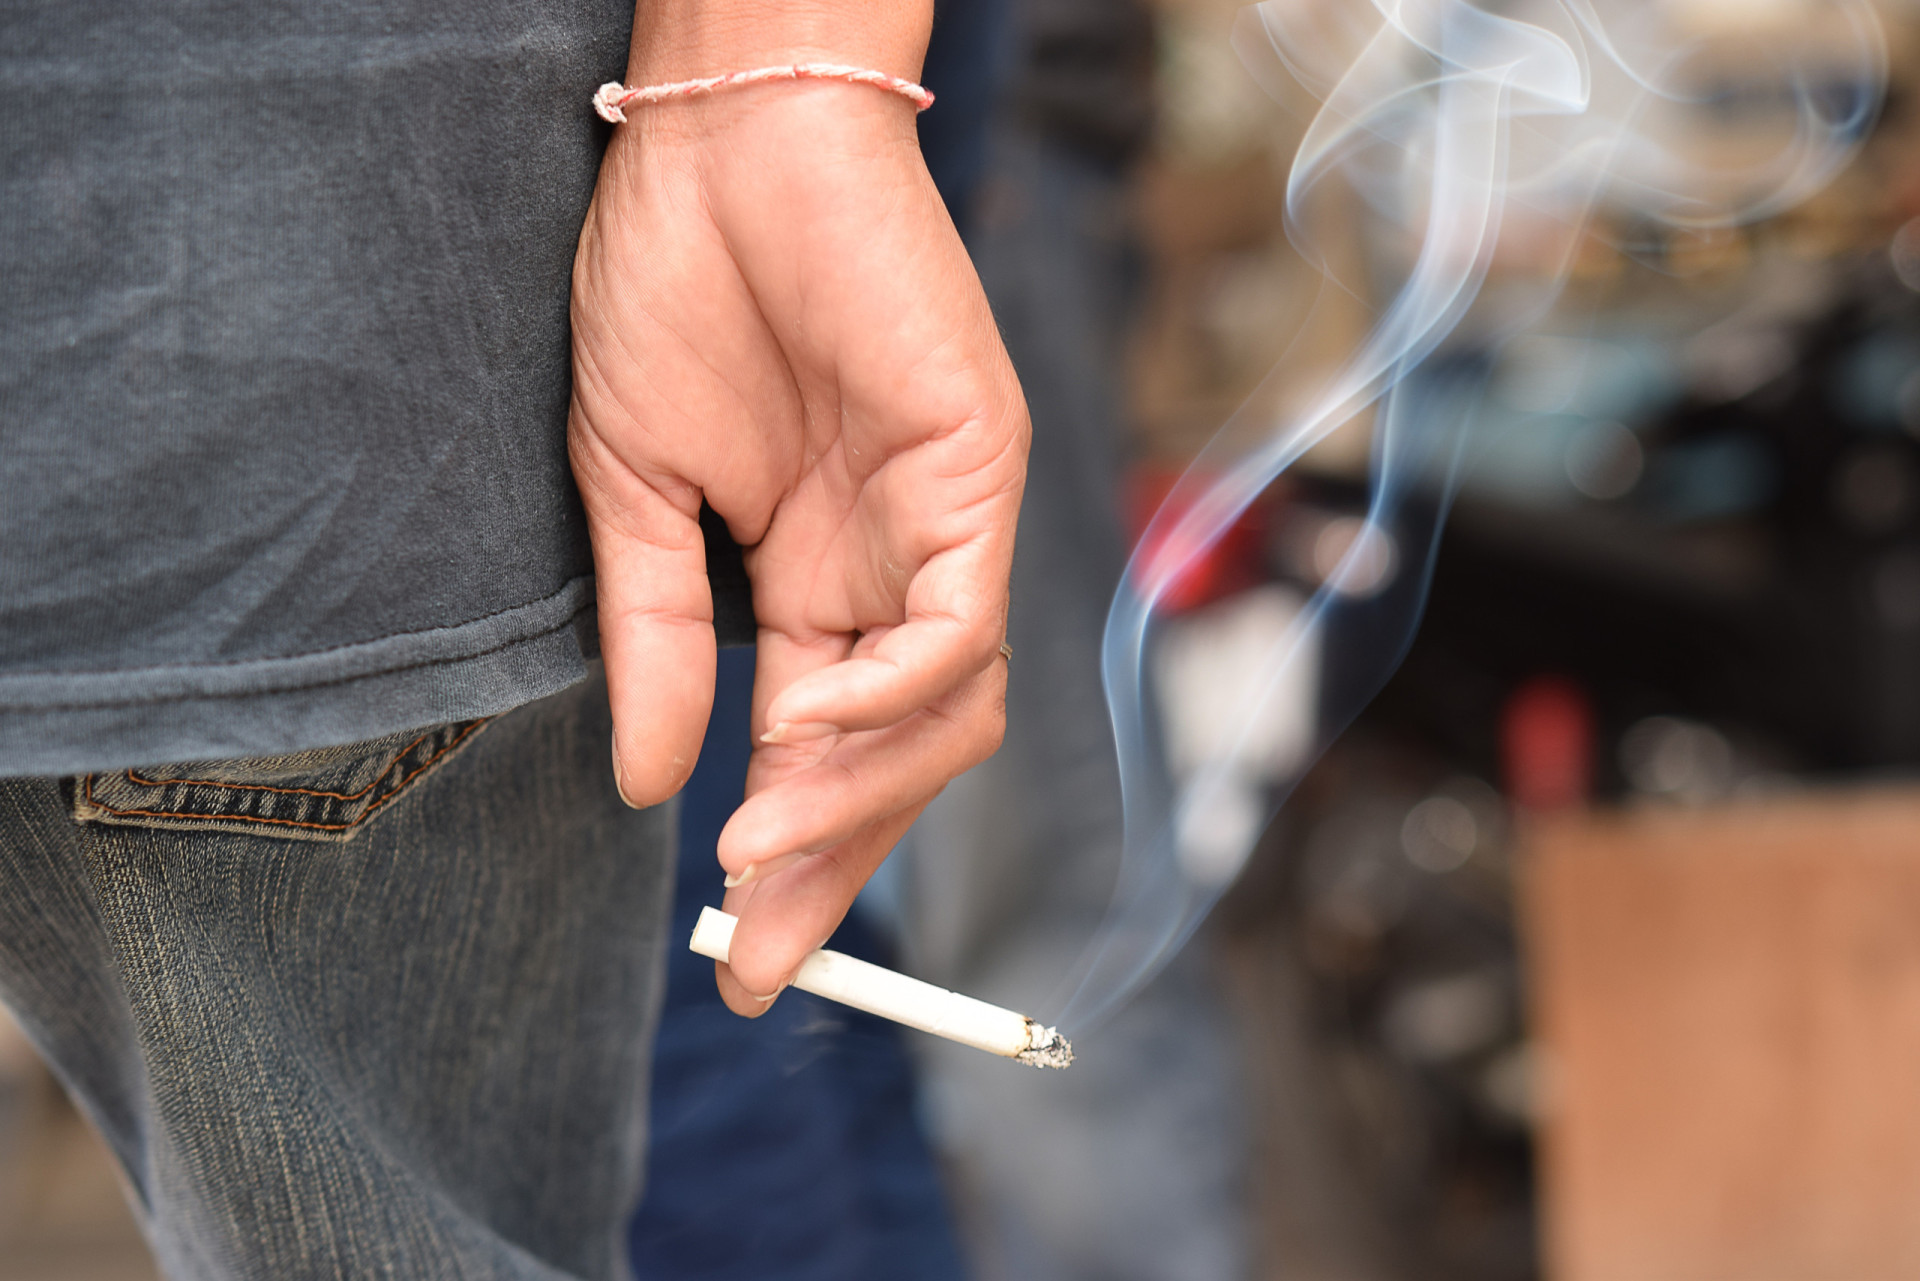 <p>Smoking affects how blood flows, which can increase the risk of DVT.</p><p><a href="https://www.msn.com/en-us/community/channel/vid-7xx8mnucu55yw63we9va2gwr7uihbxwc68fxqp25x6tg4ftibpra?cvid=94631541bc0f4f89bfd59158d696ad7e">Follow us and access great exclusive content every day</a></p>